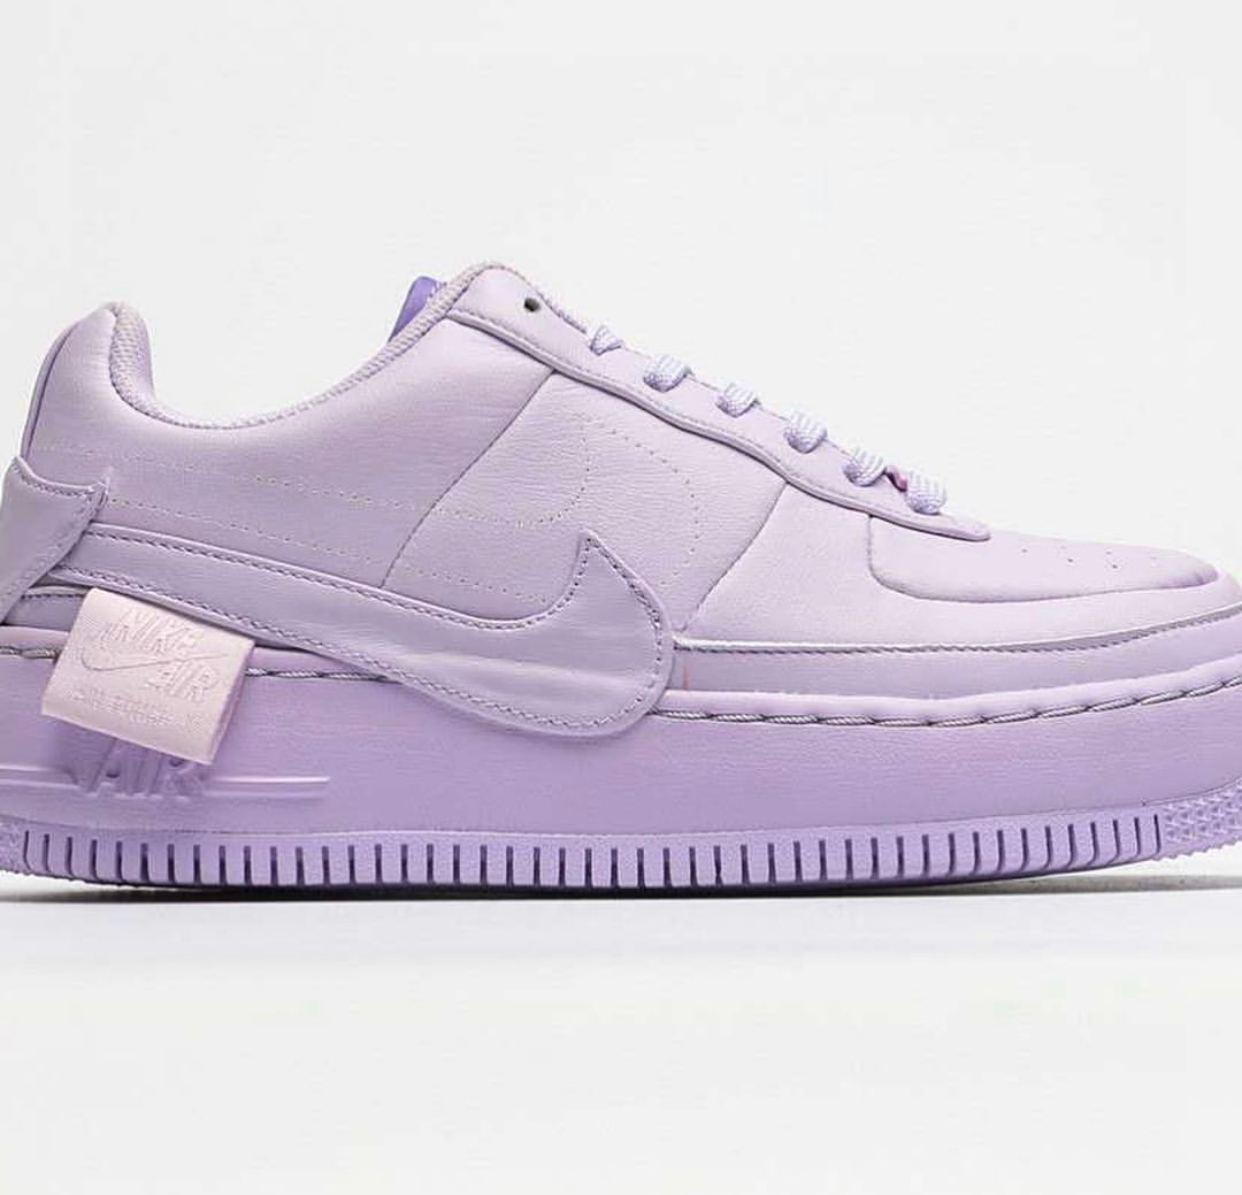 Nike Air Force 1 Jester XX Violet Mist – shopwith.styleee